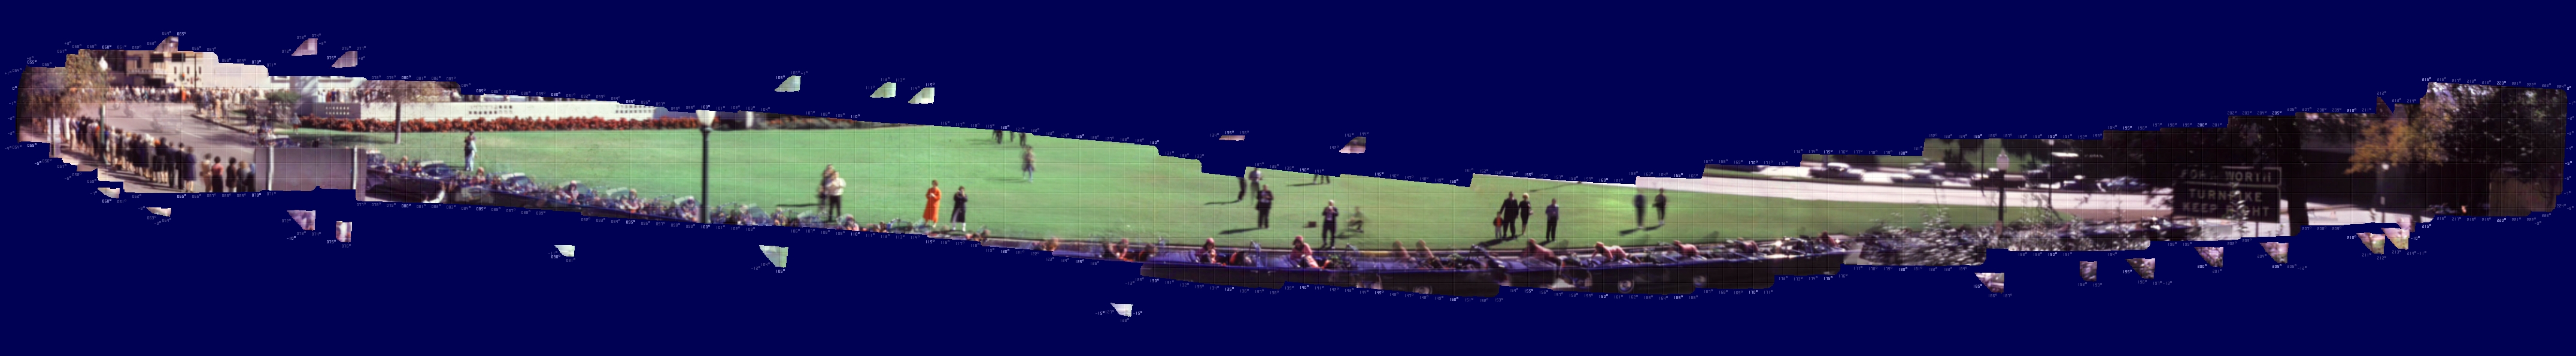 Zapruder panorama only, with gridlines, compass bearings,
        and angles of depression